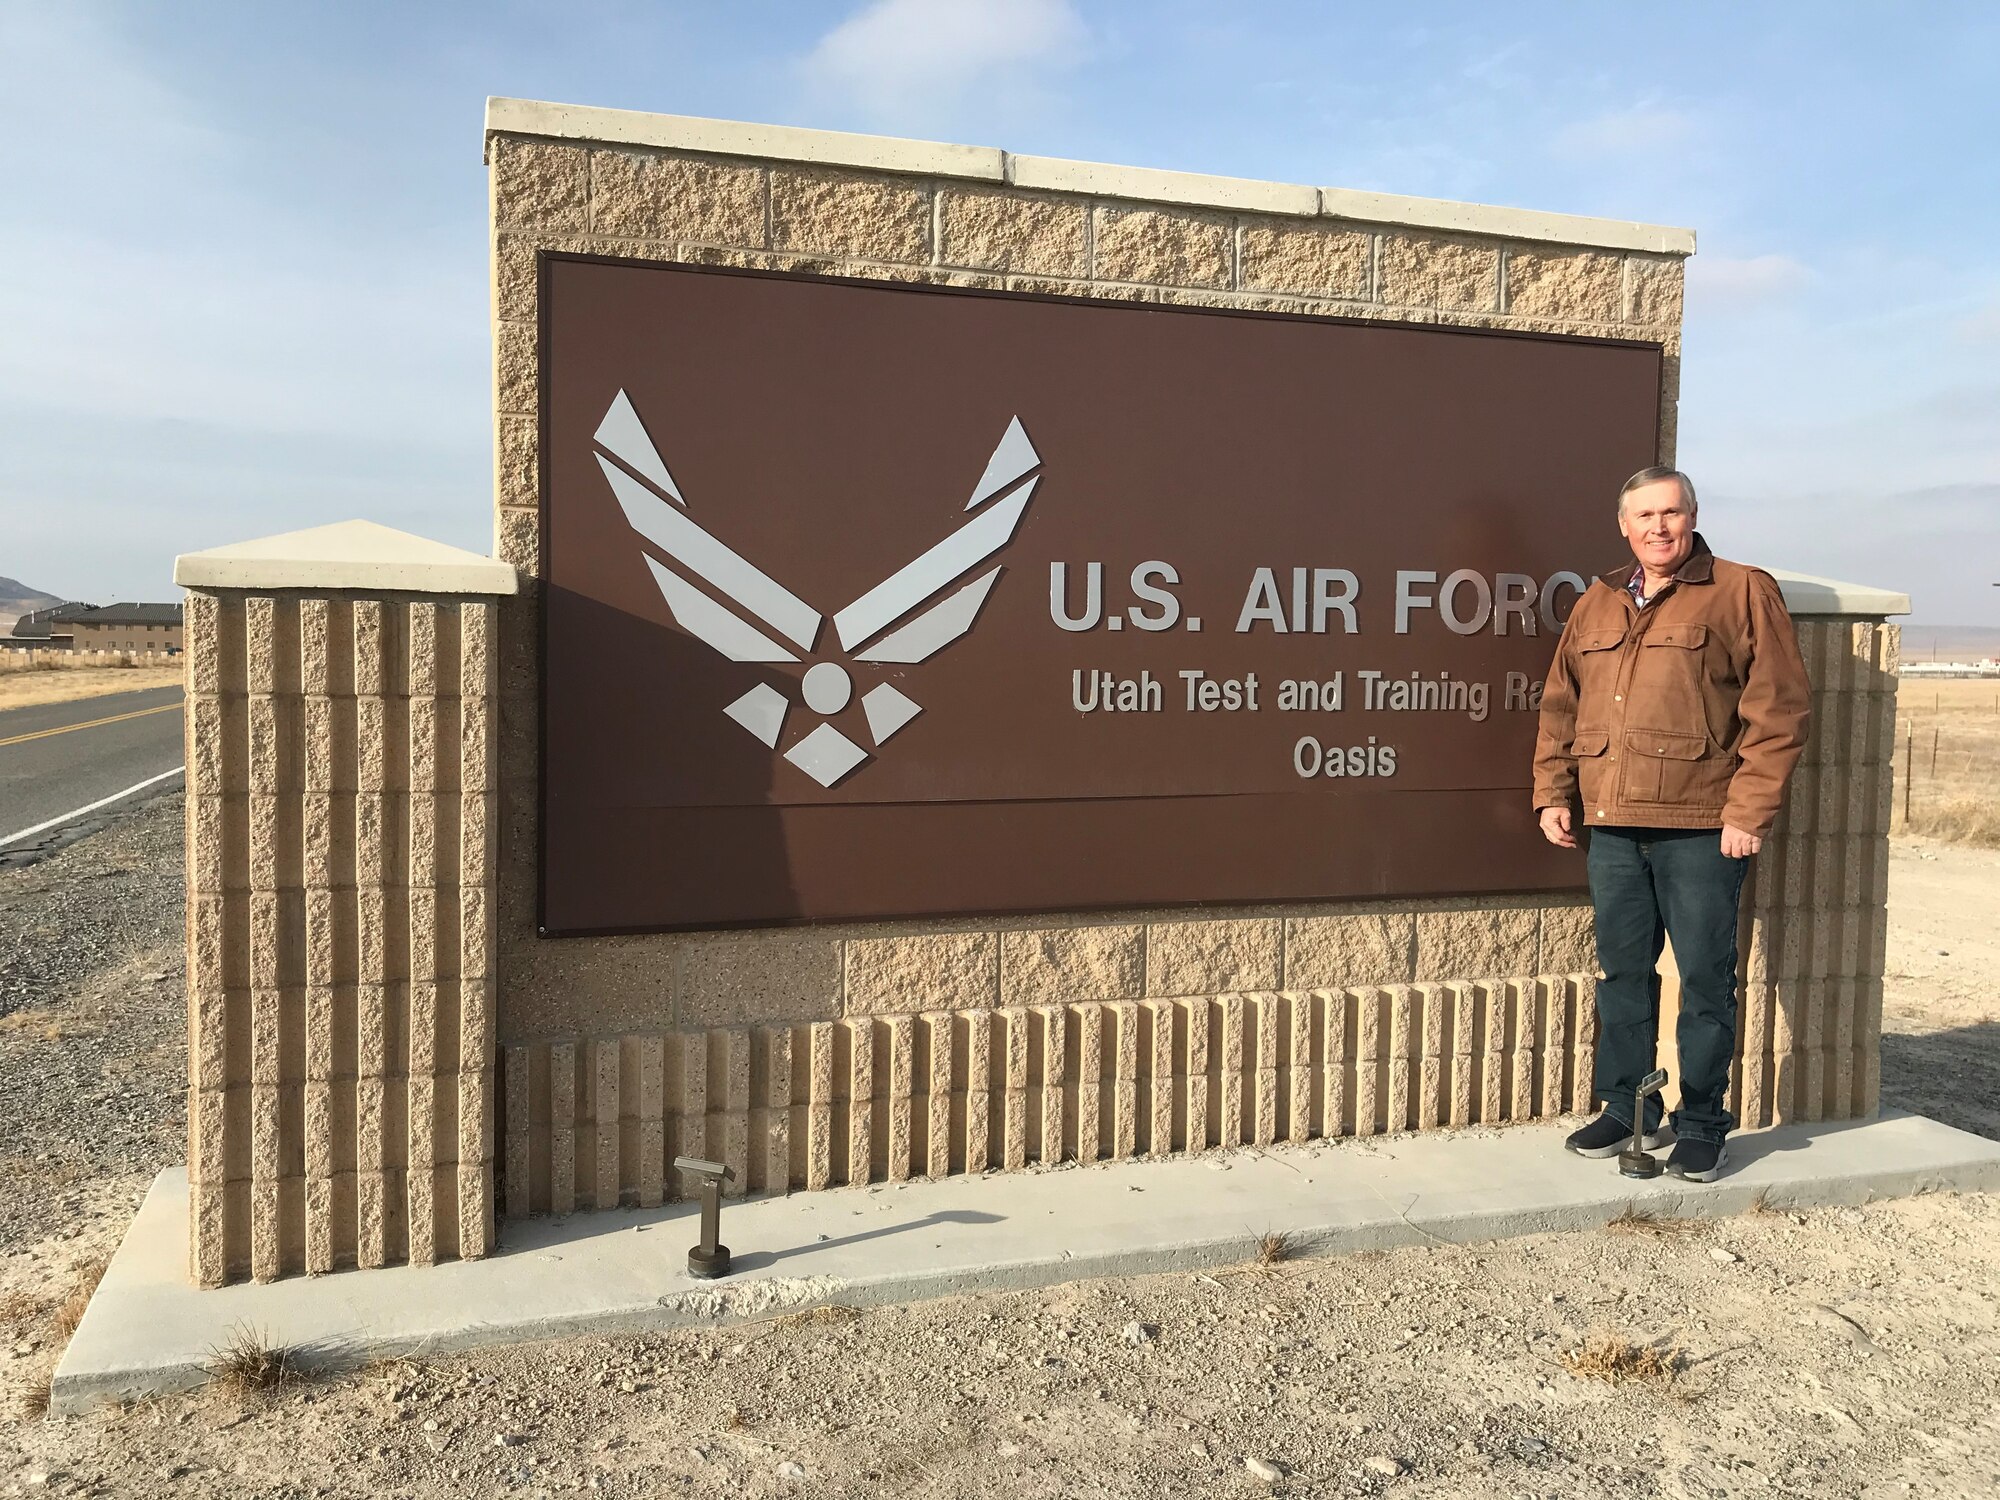 Hal Sagers, director of the Range Support Division, which falls under the 75th Civil Engineer Group, has spent a career maintaining the Utah Test and Training Range. Although he is eligible to retire at any time, he finds too much job satisfaction to give it up just yet.